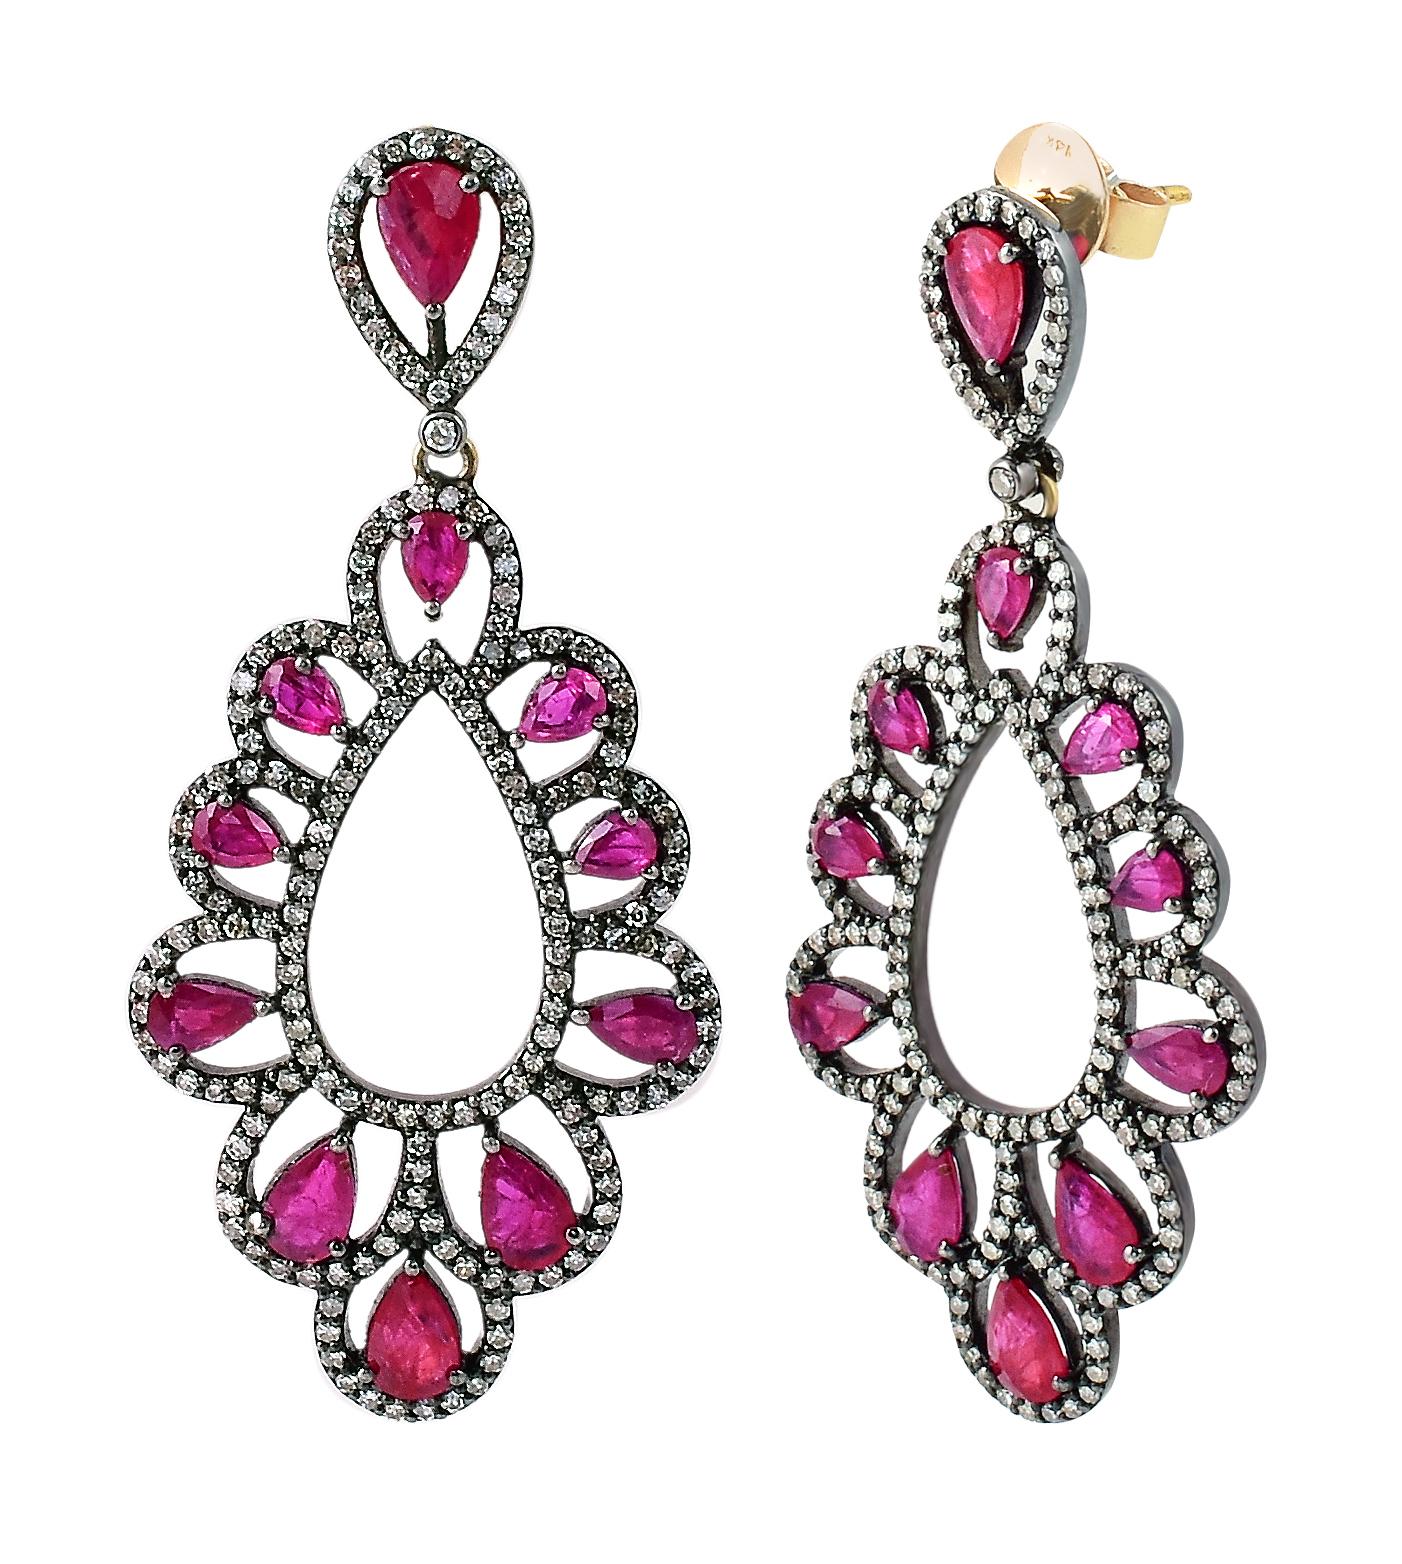 Victorian Style Diamond and Ruby Dangle Earrings

This Victorian style wine red ruby and diamond long earring is gorgeous. The bottom overall kite shape formed with the beautiful designer element of 10 individual U-shape crafted to perfection with